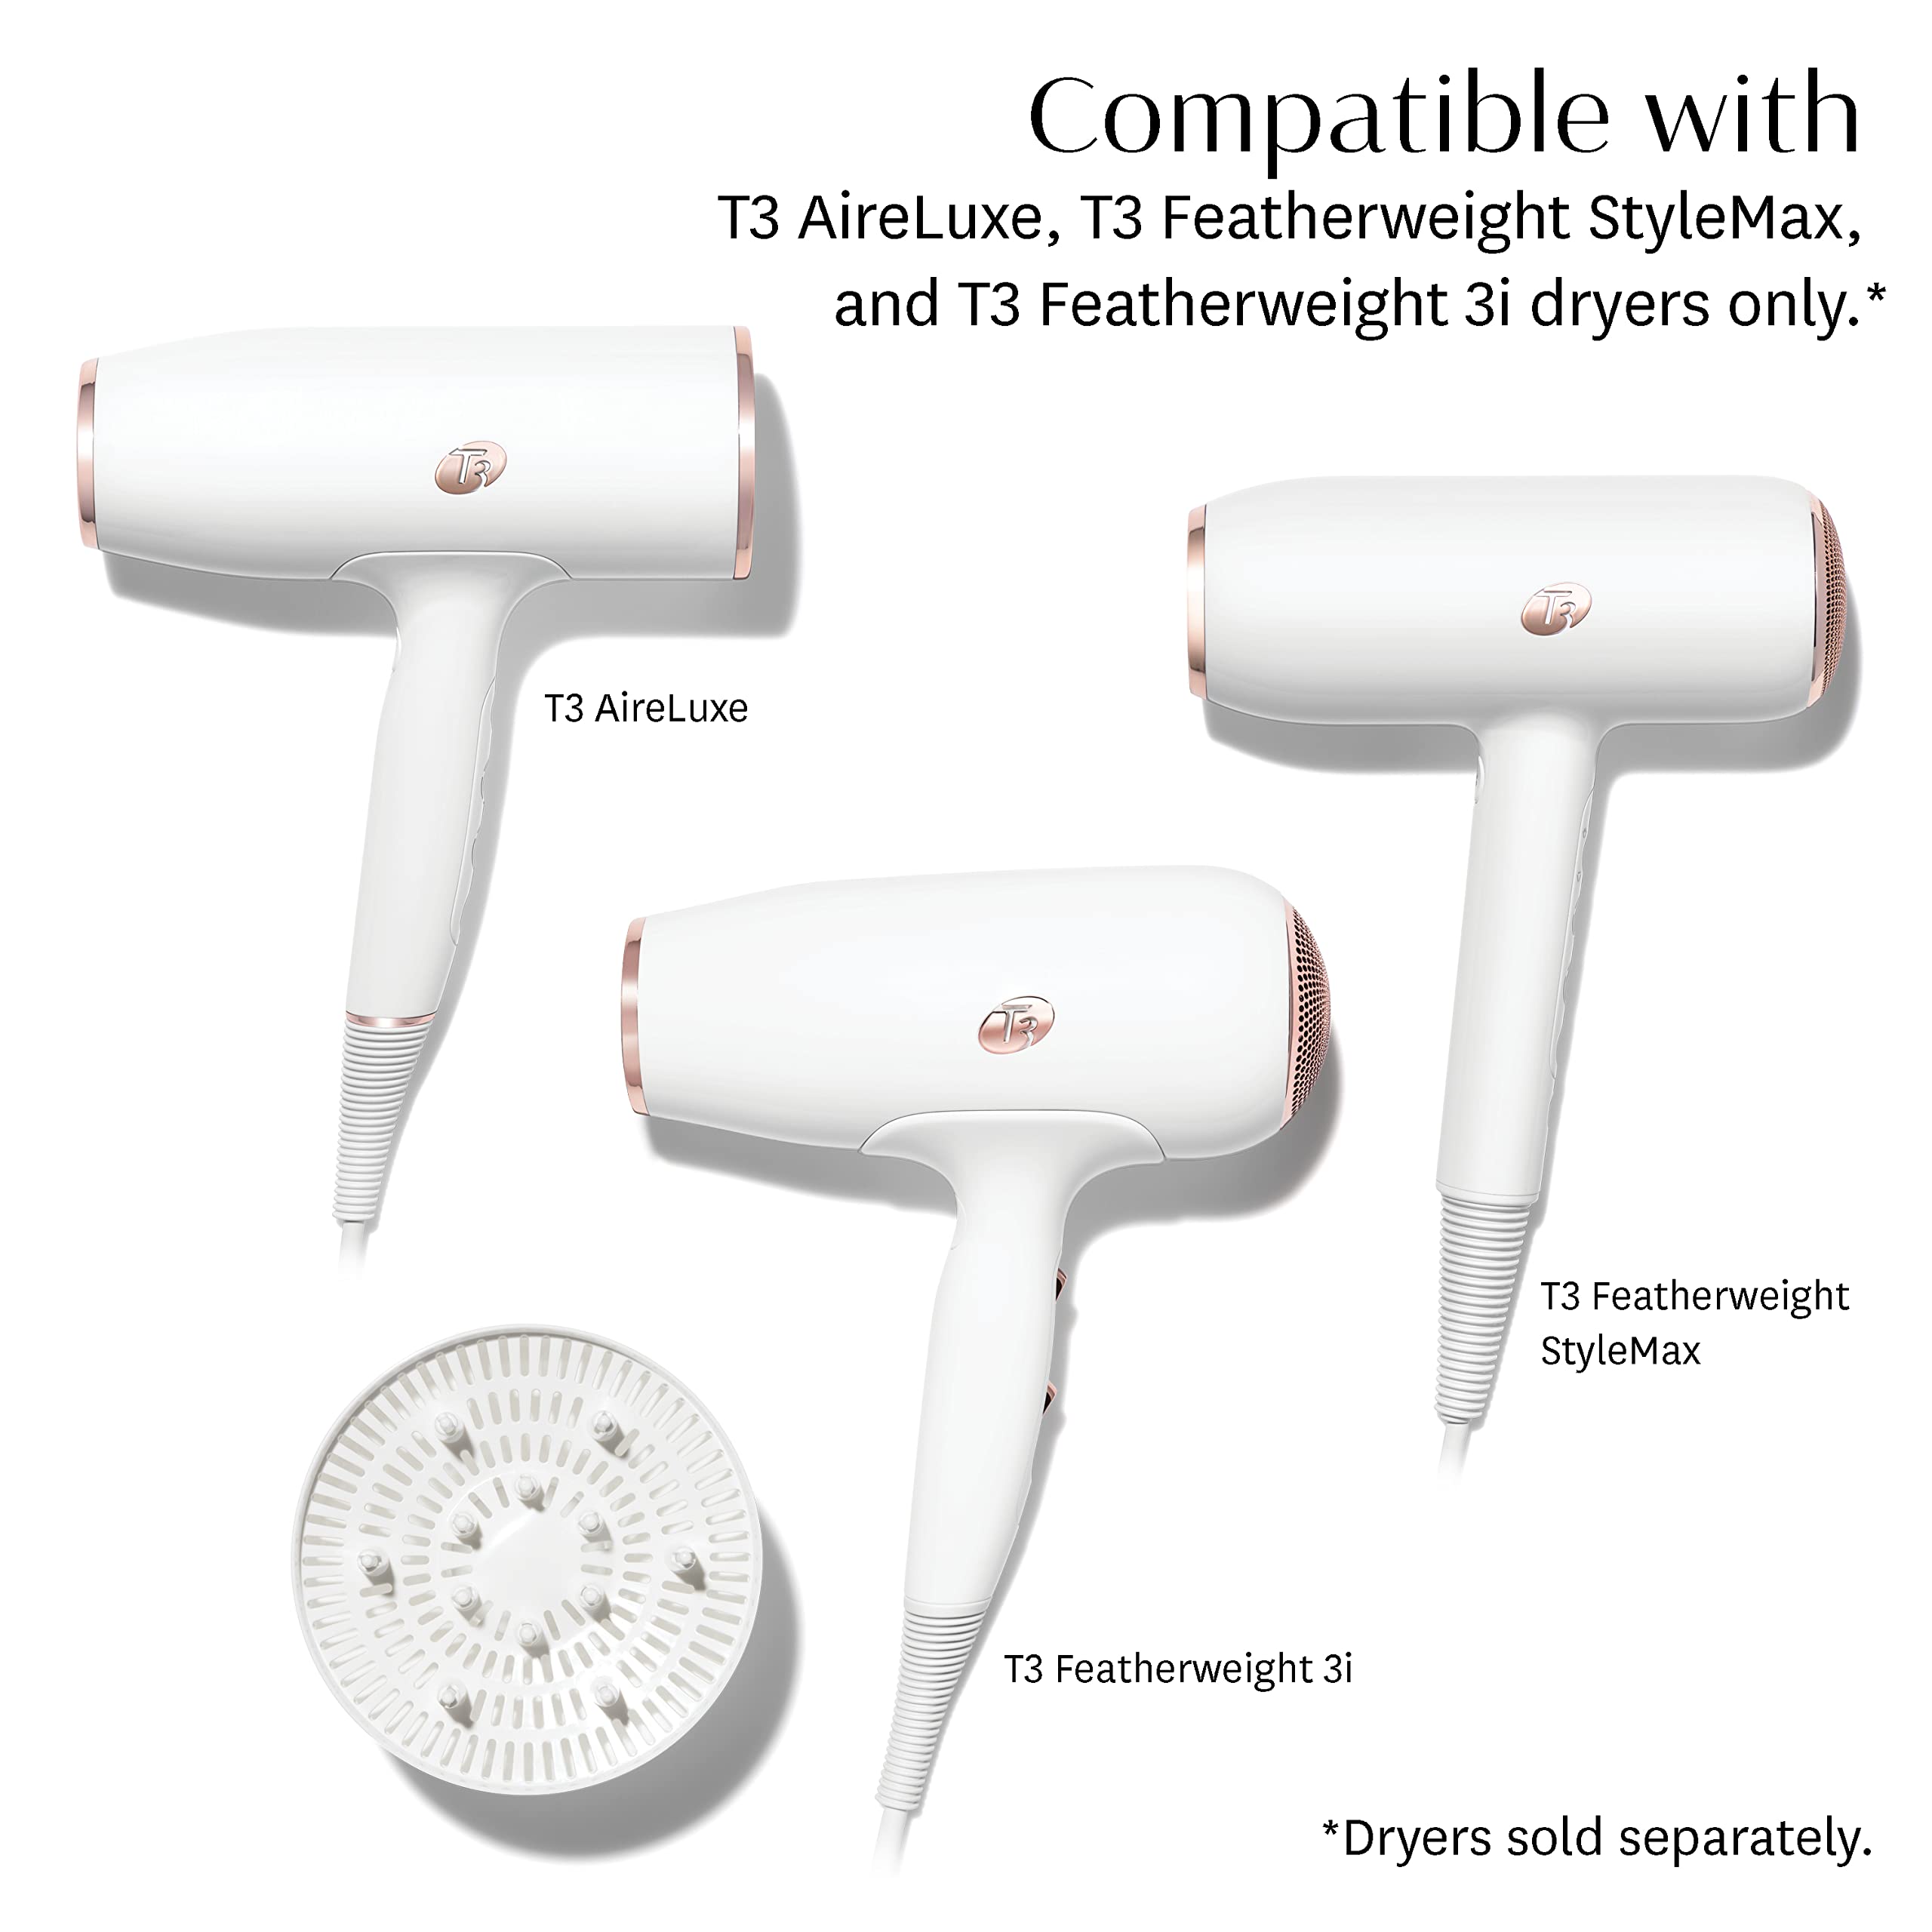 T3 SoftTouch 3 Diffuser | Compatible with T3 AireLuxe, T3 Featherweight StyleMax & T3 Featherweight 3i Hair Dryers only | Volumize, Define Curls and Eliminate Frizz for Wavy, Curly or Coily Hair